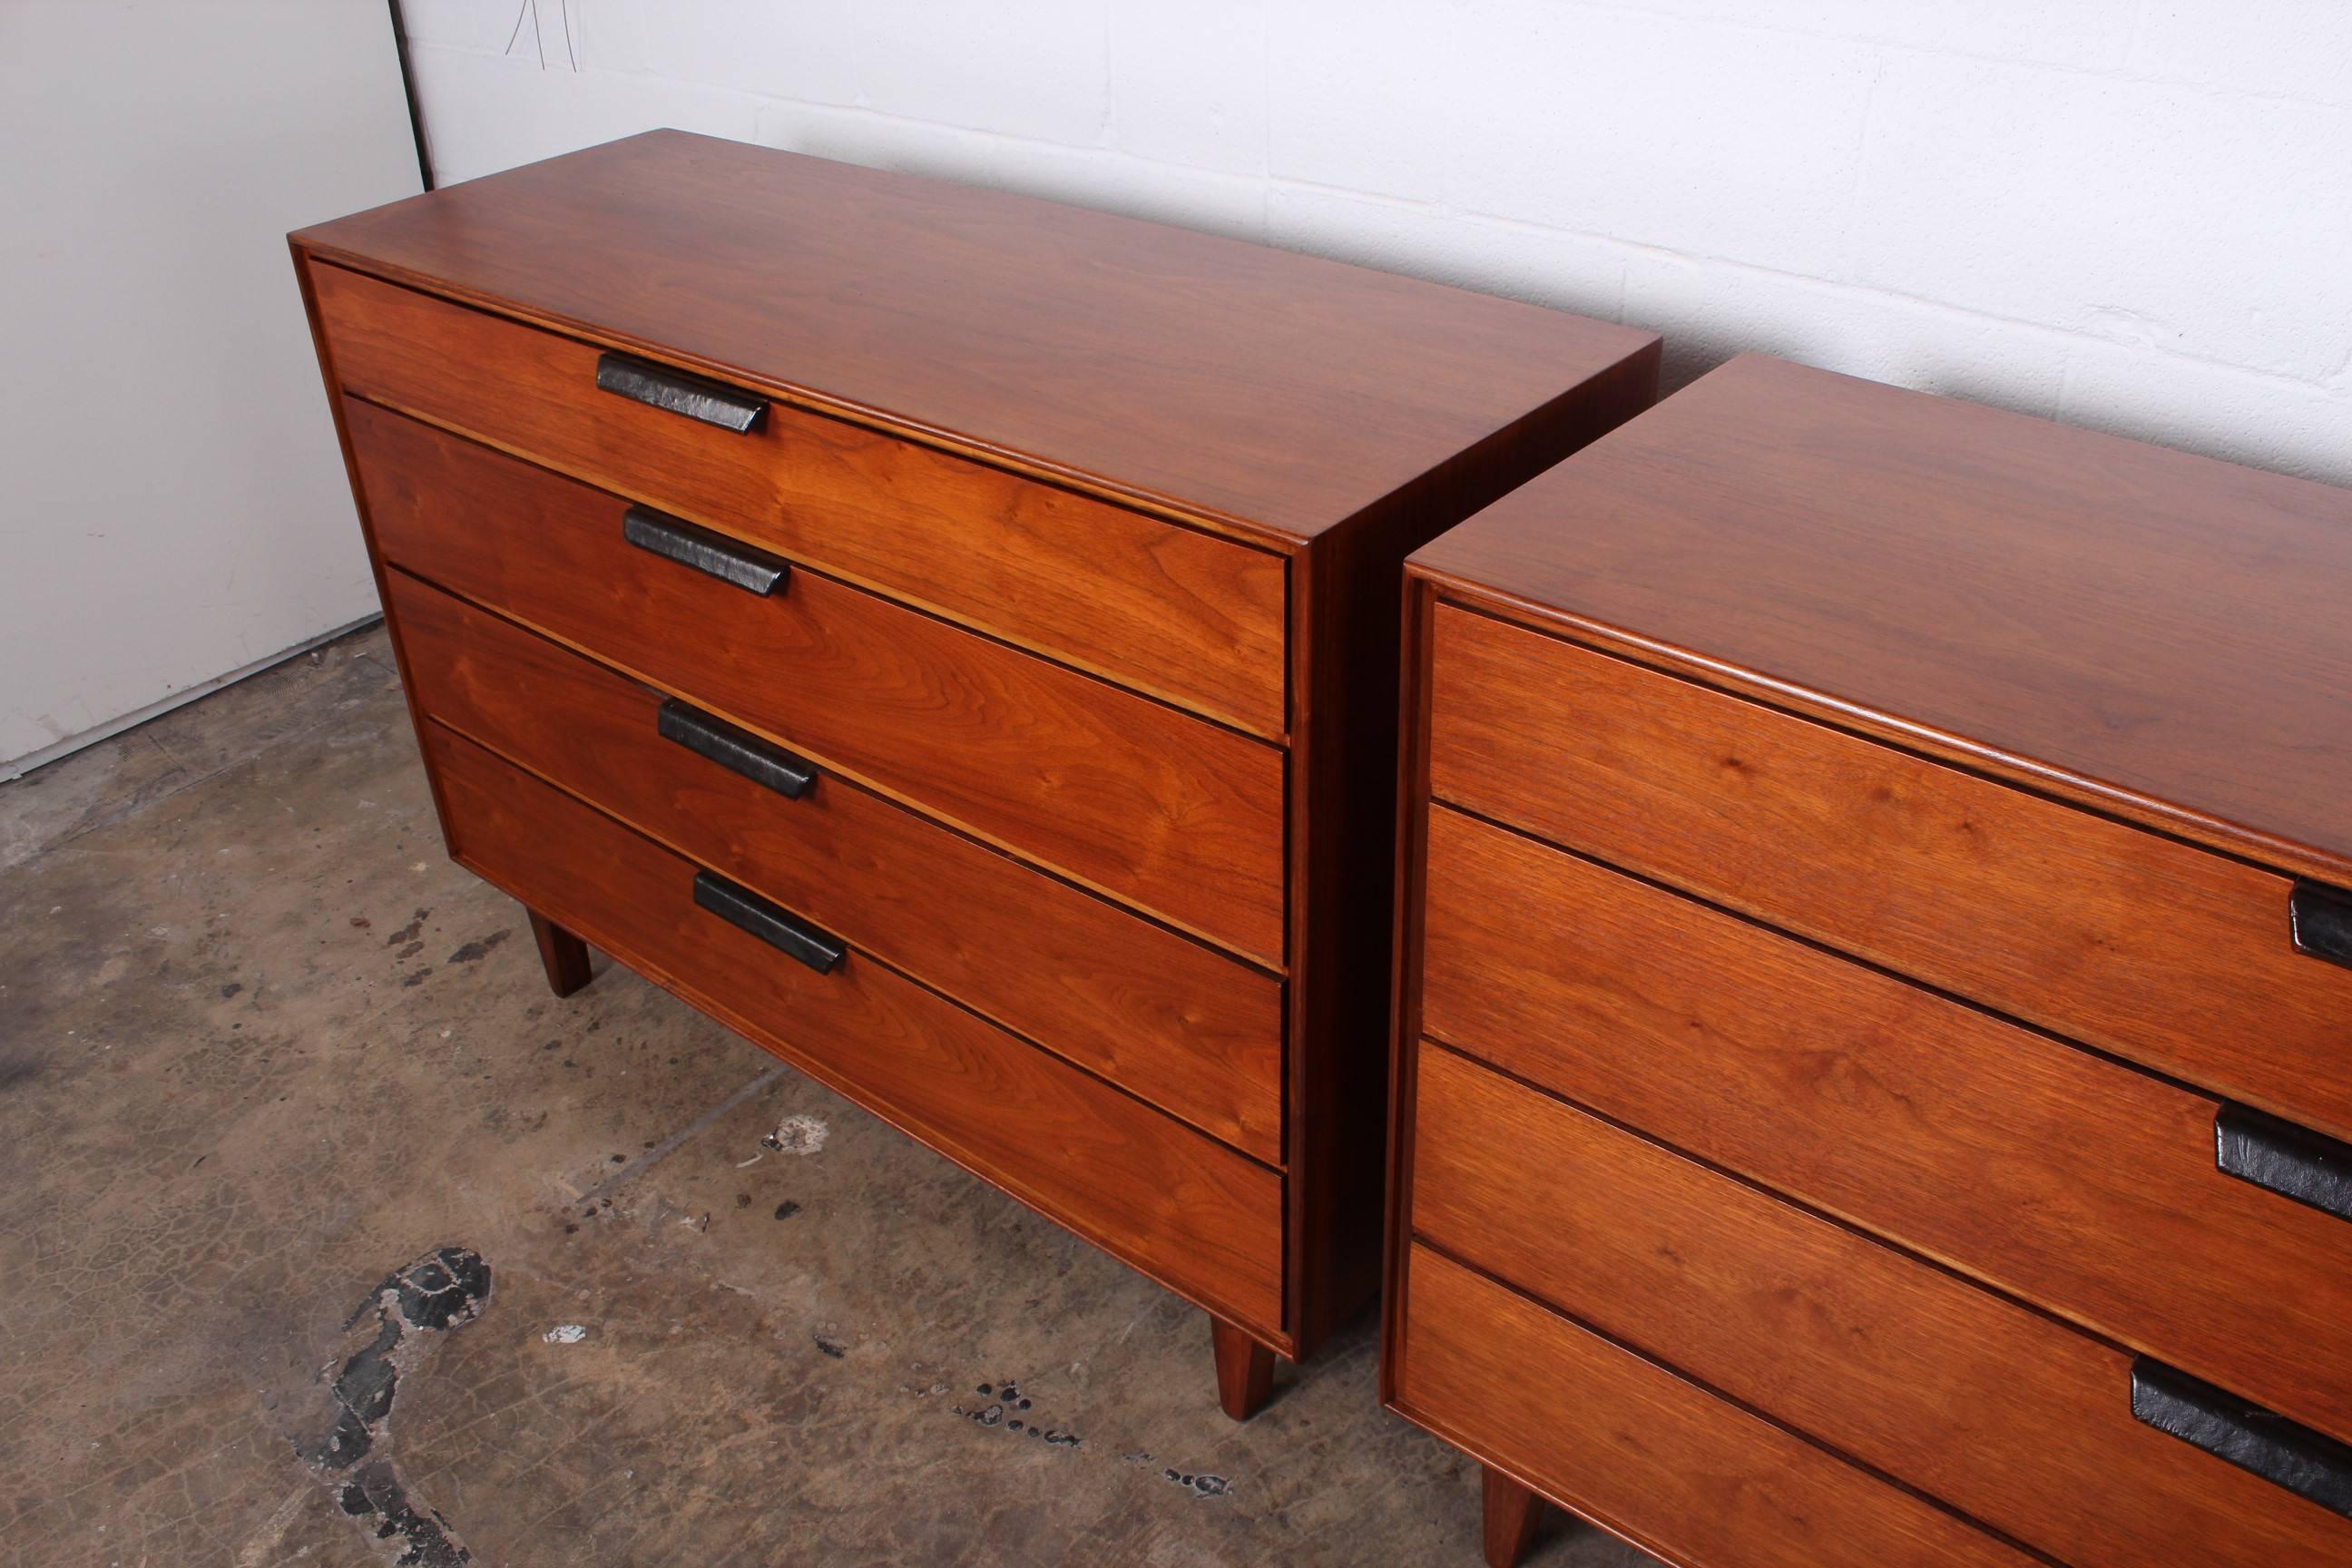 Mid-20th Century Pair of Dressers with Leather Handles by Edward Wormley for Dunbar